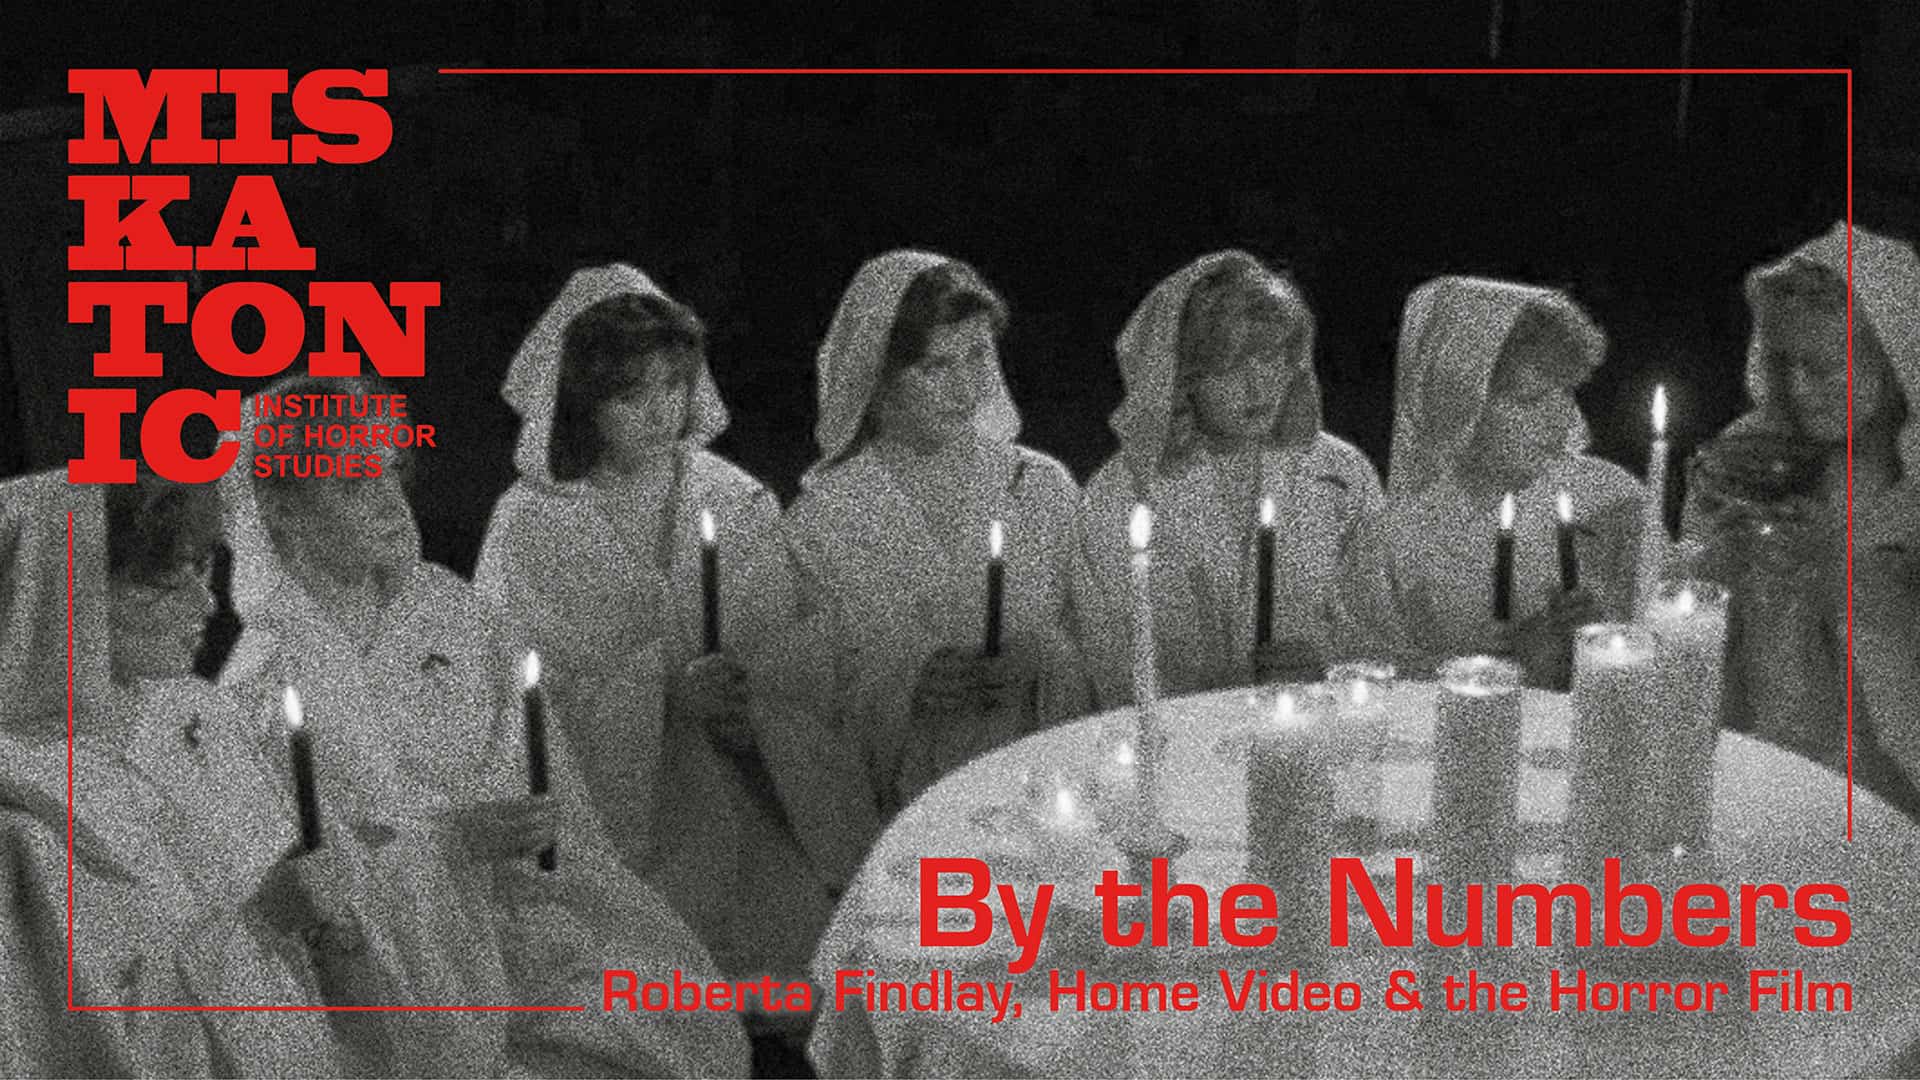 By the Numbers: Roberta Findlay, Home Video and the Horror Film (London)